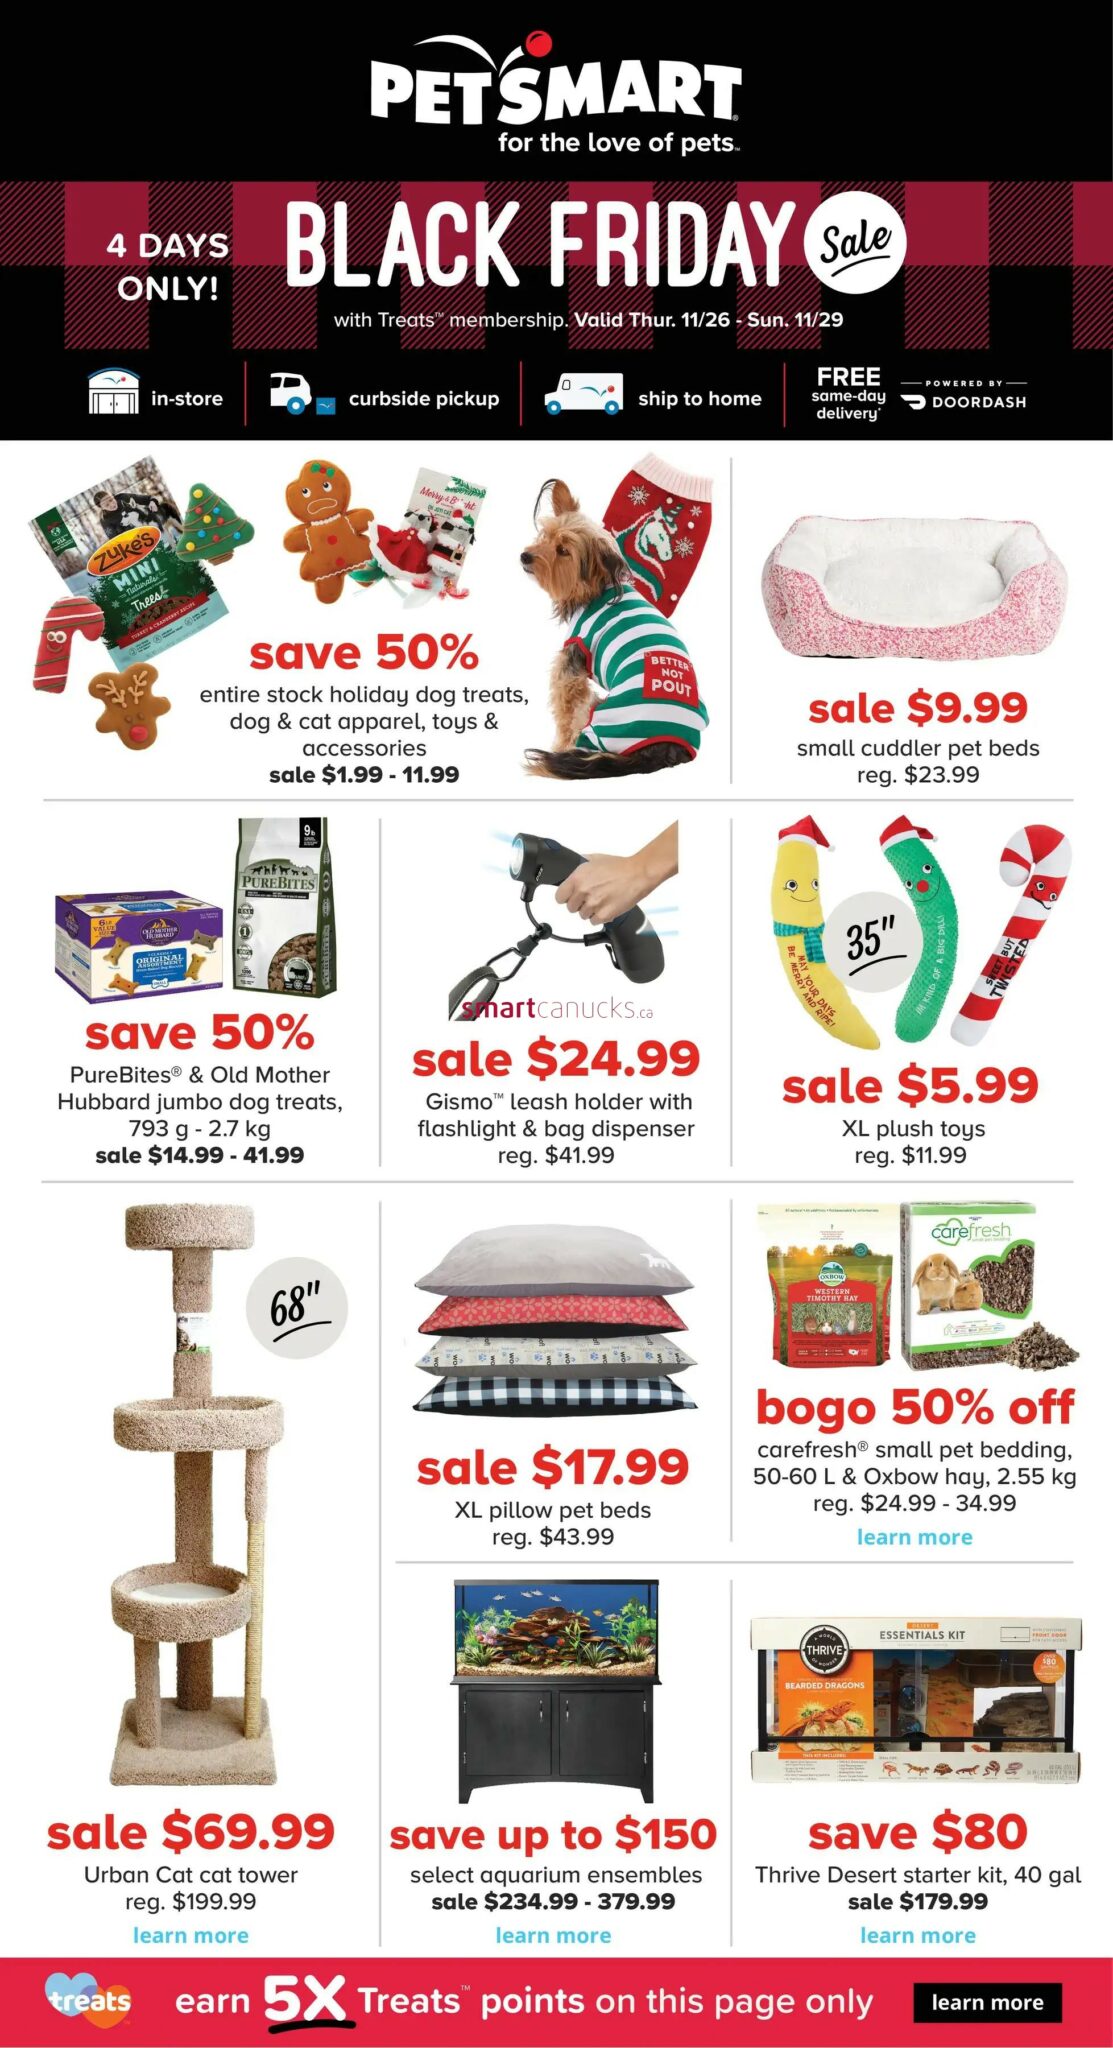 PetSmart Canada Black Friday 2021 Sale Flyer - What Stores Can You Black Friday Shop Online